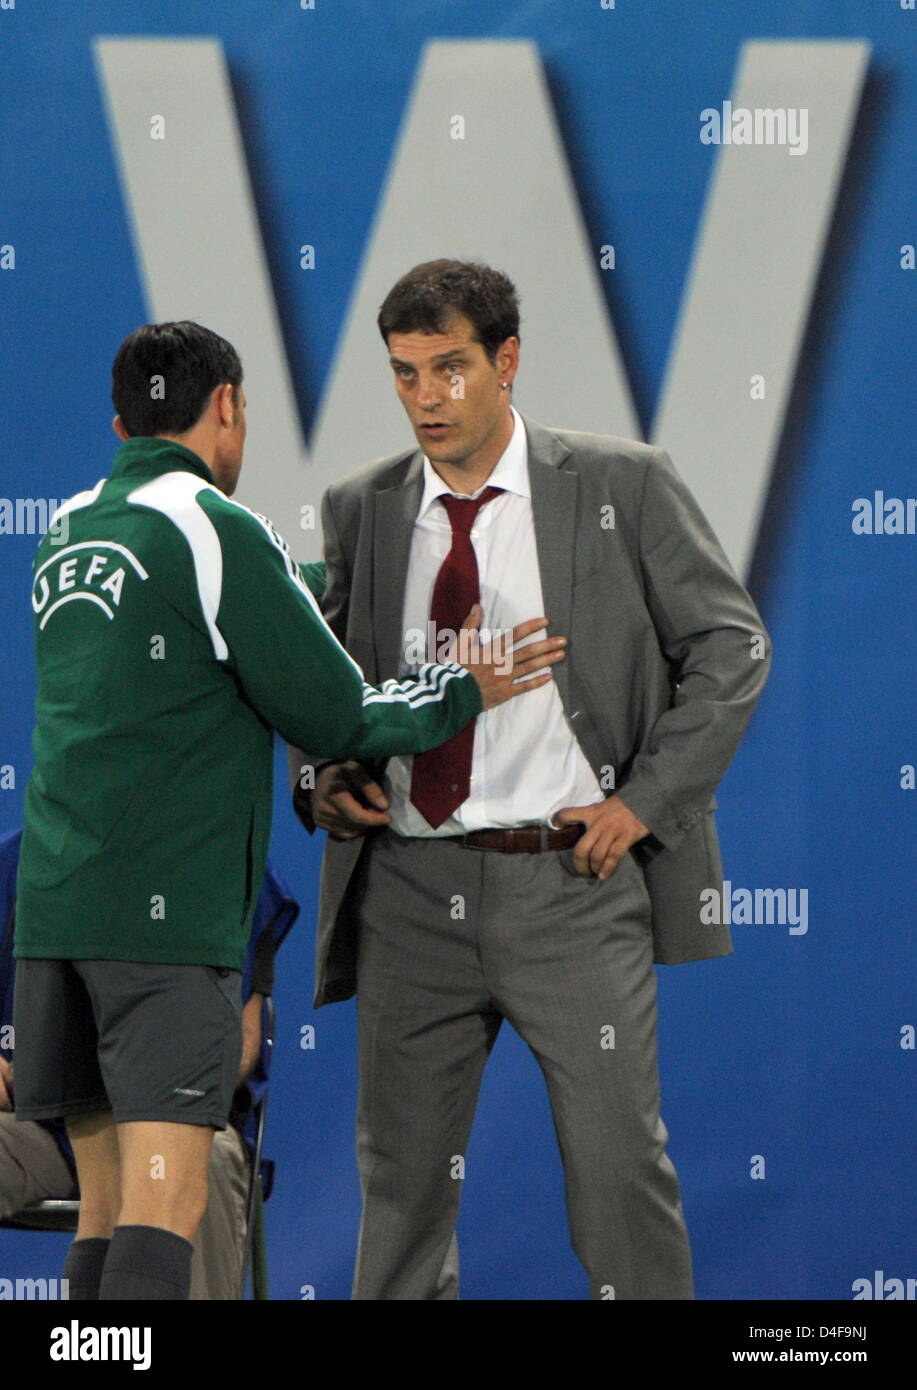 Fourth official Manuel Mejuto Gontales (L) discusses with head coach Slaven Bilic of Croatia during the UEFA EURO 2008 quarter final match between Croatia and Turkey at the Ernst Happel stadium in Vienna, Austria, 20 June 2008. Photo: Achim Scheidemann dpa +please note UEFA restrictions particulary in regard to slide shows and 'No Mobile Services'+ +++(c) dpa - Bildfunk+++ Stock Photo